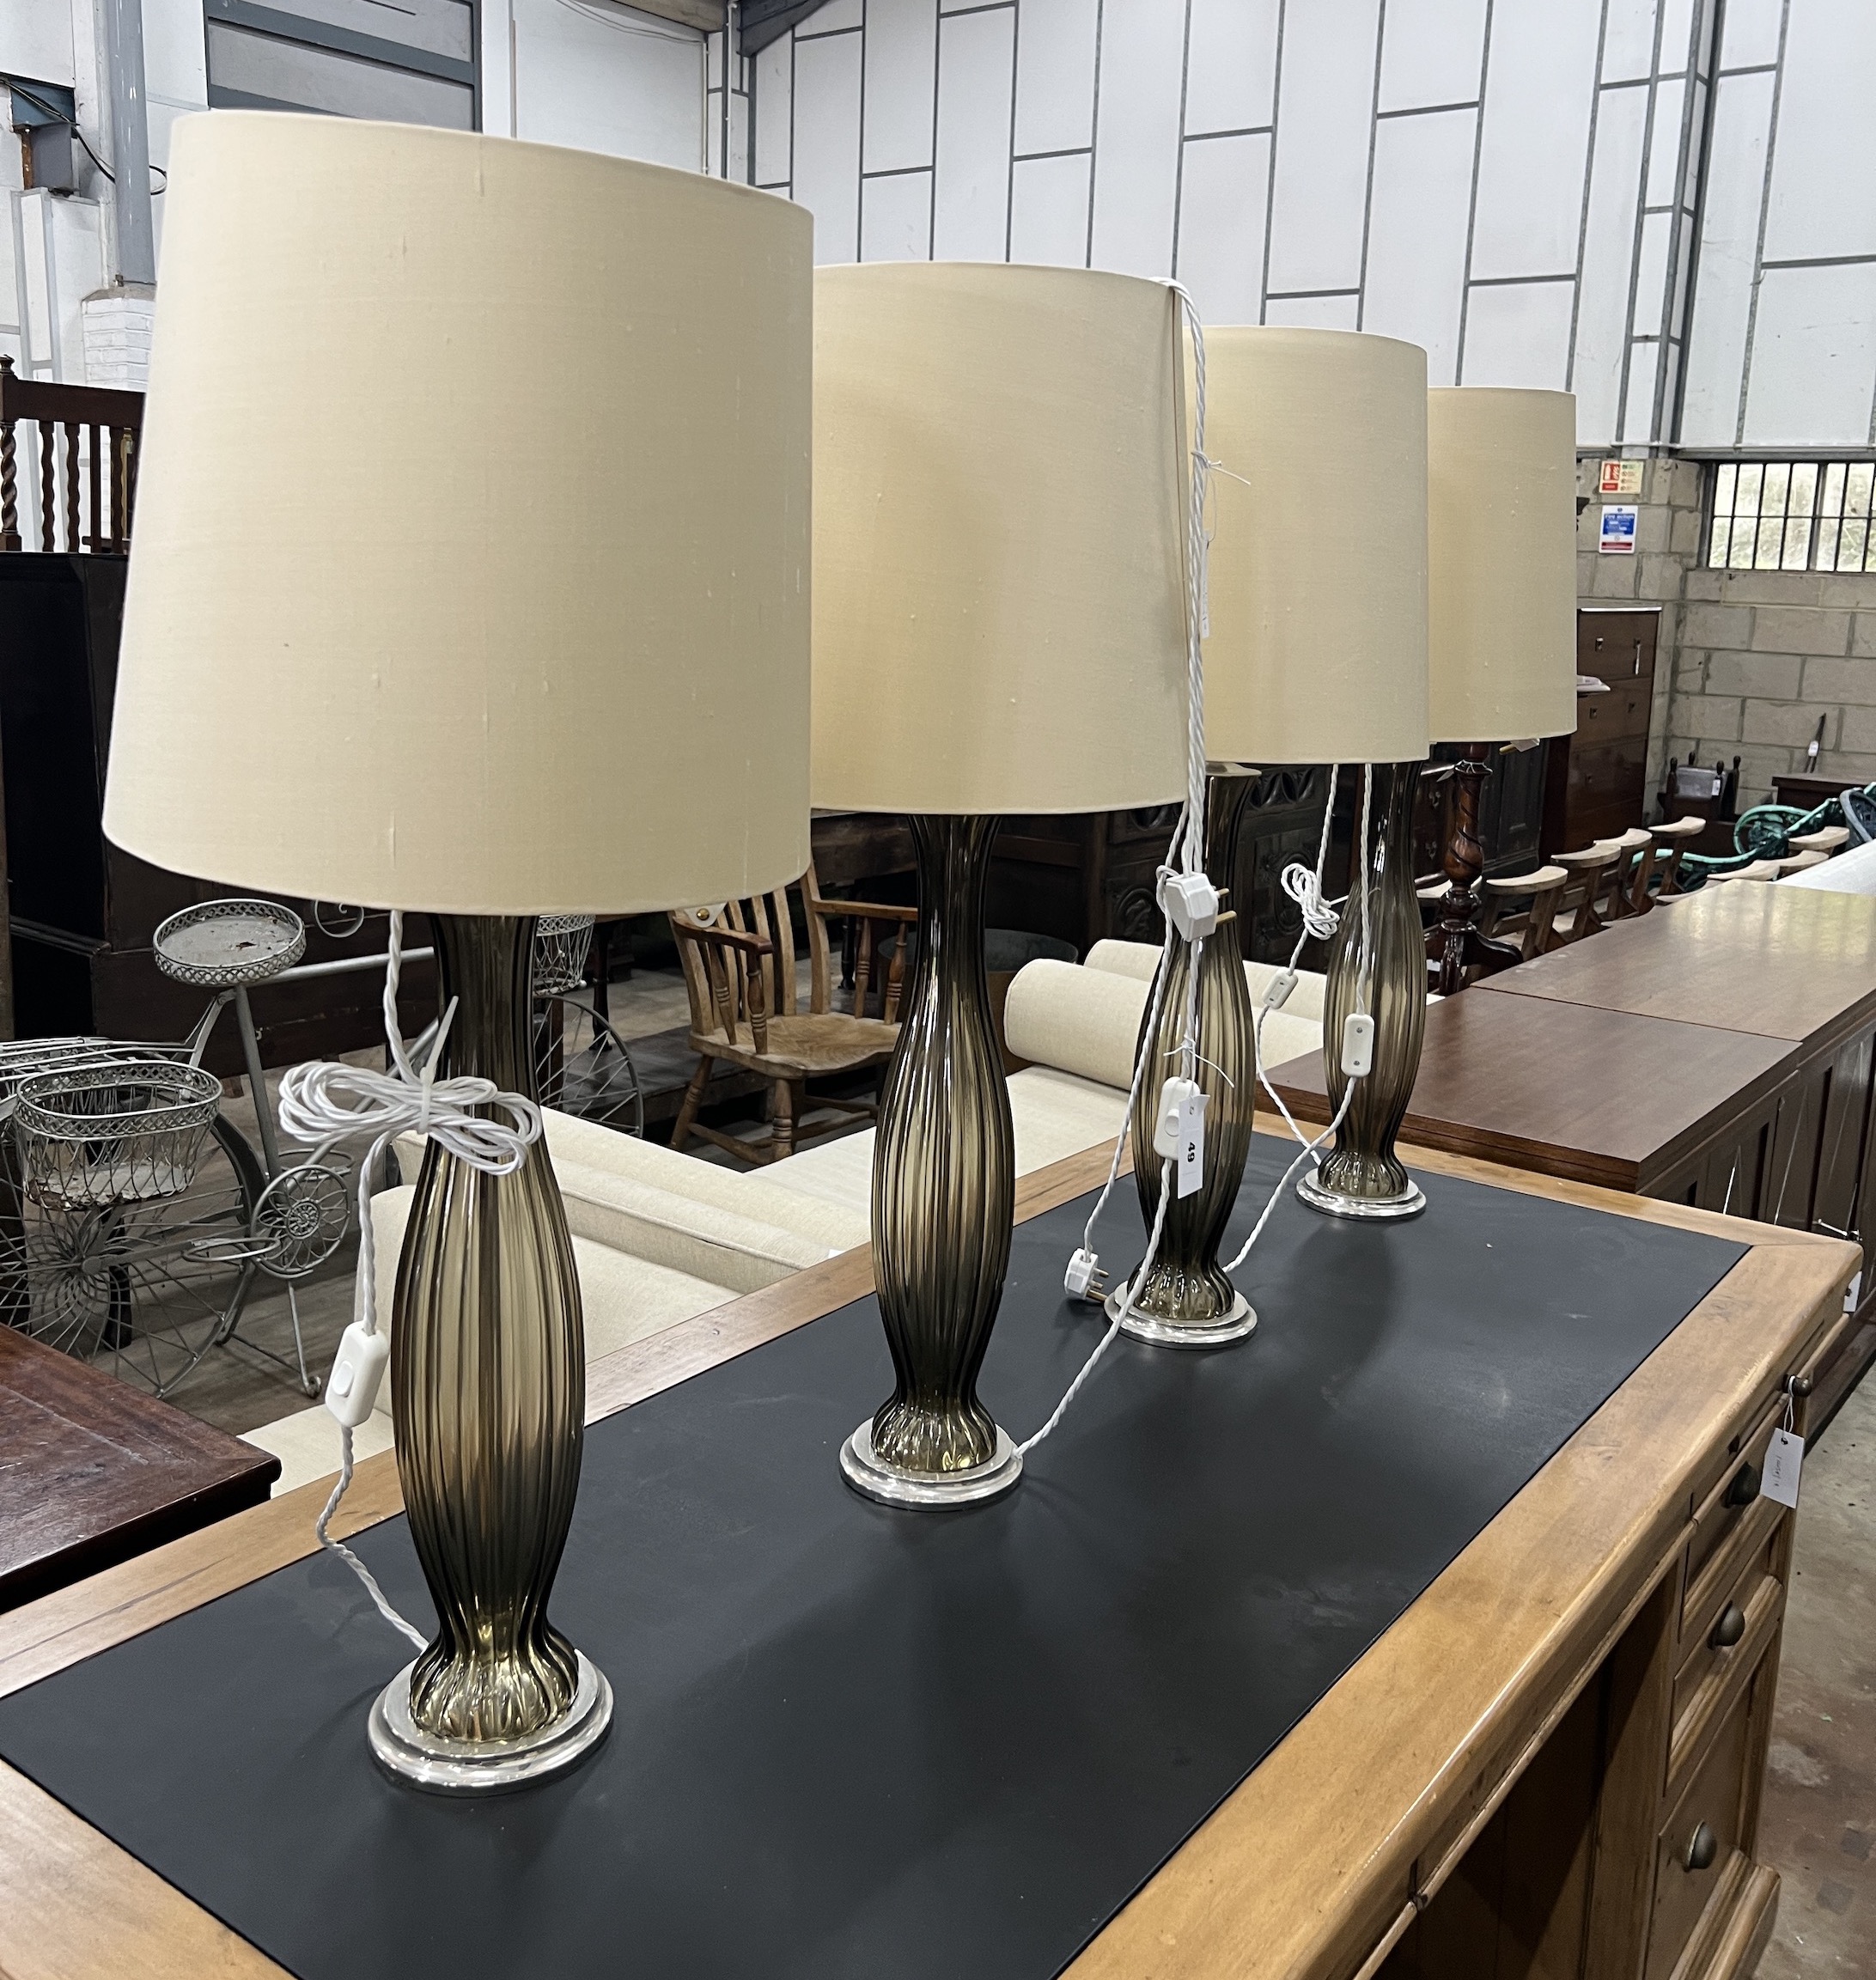 A set of four Bella Figura contemporary fluted glass table lamps and shades, height including shades 86cm                                                                                                                   